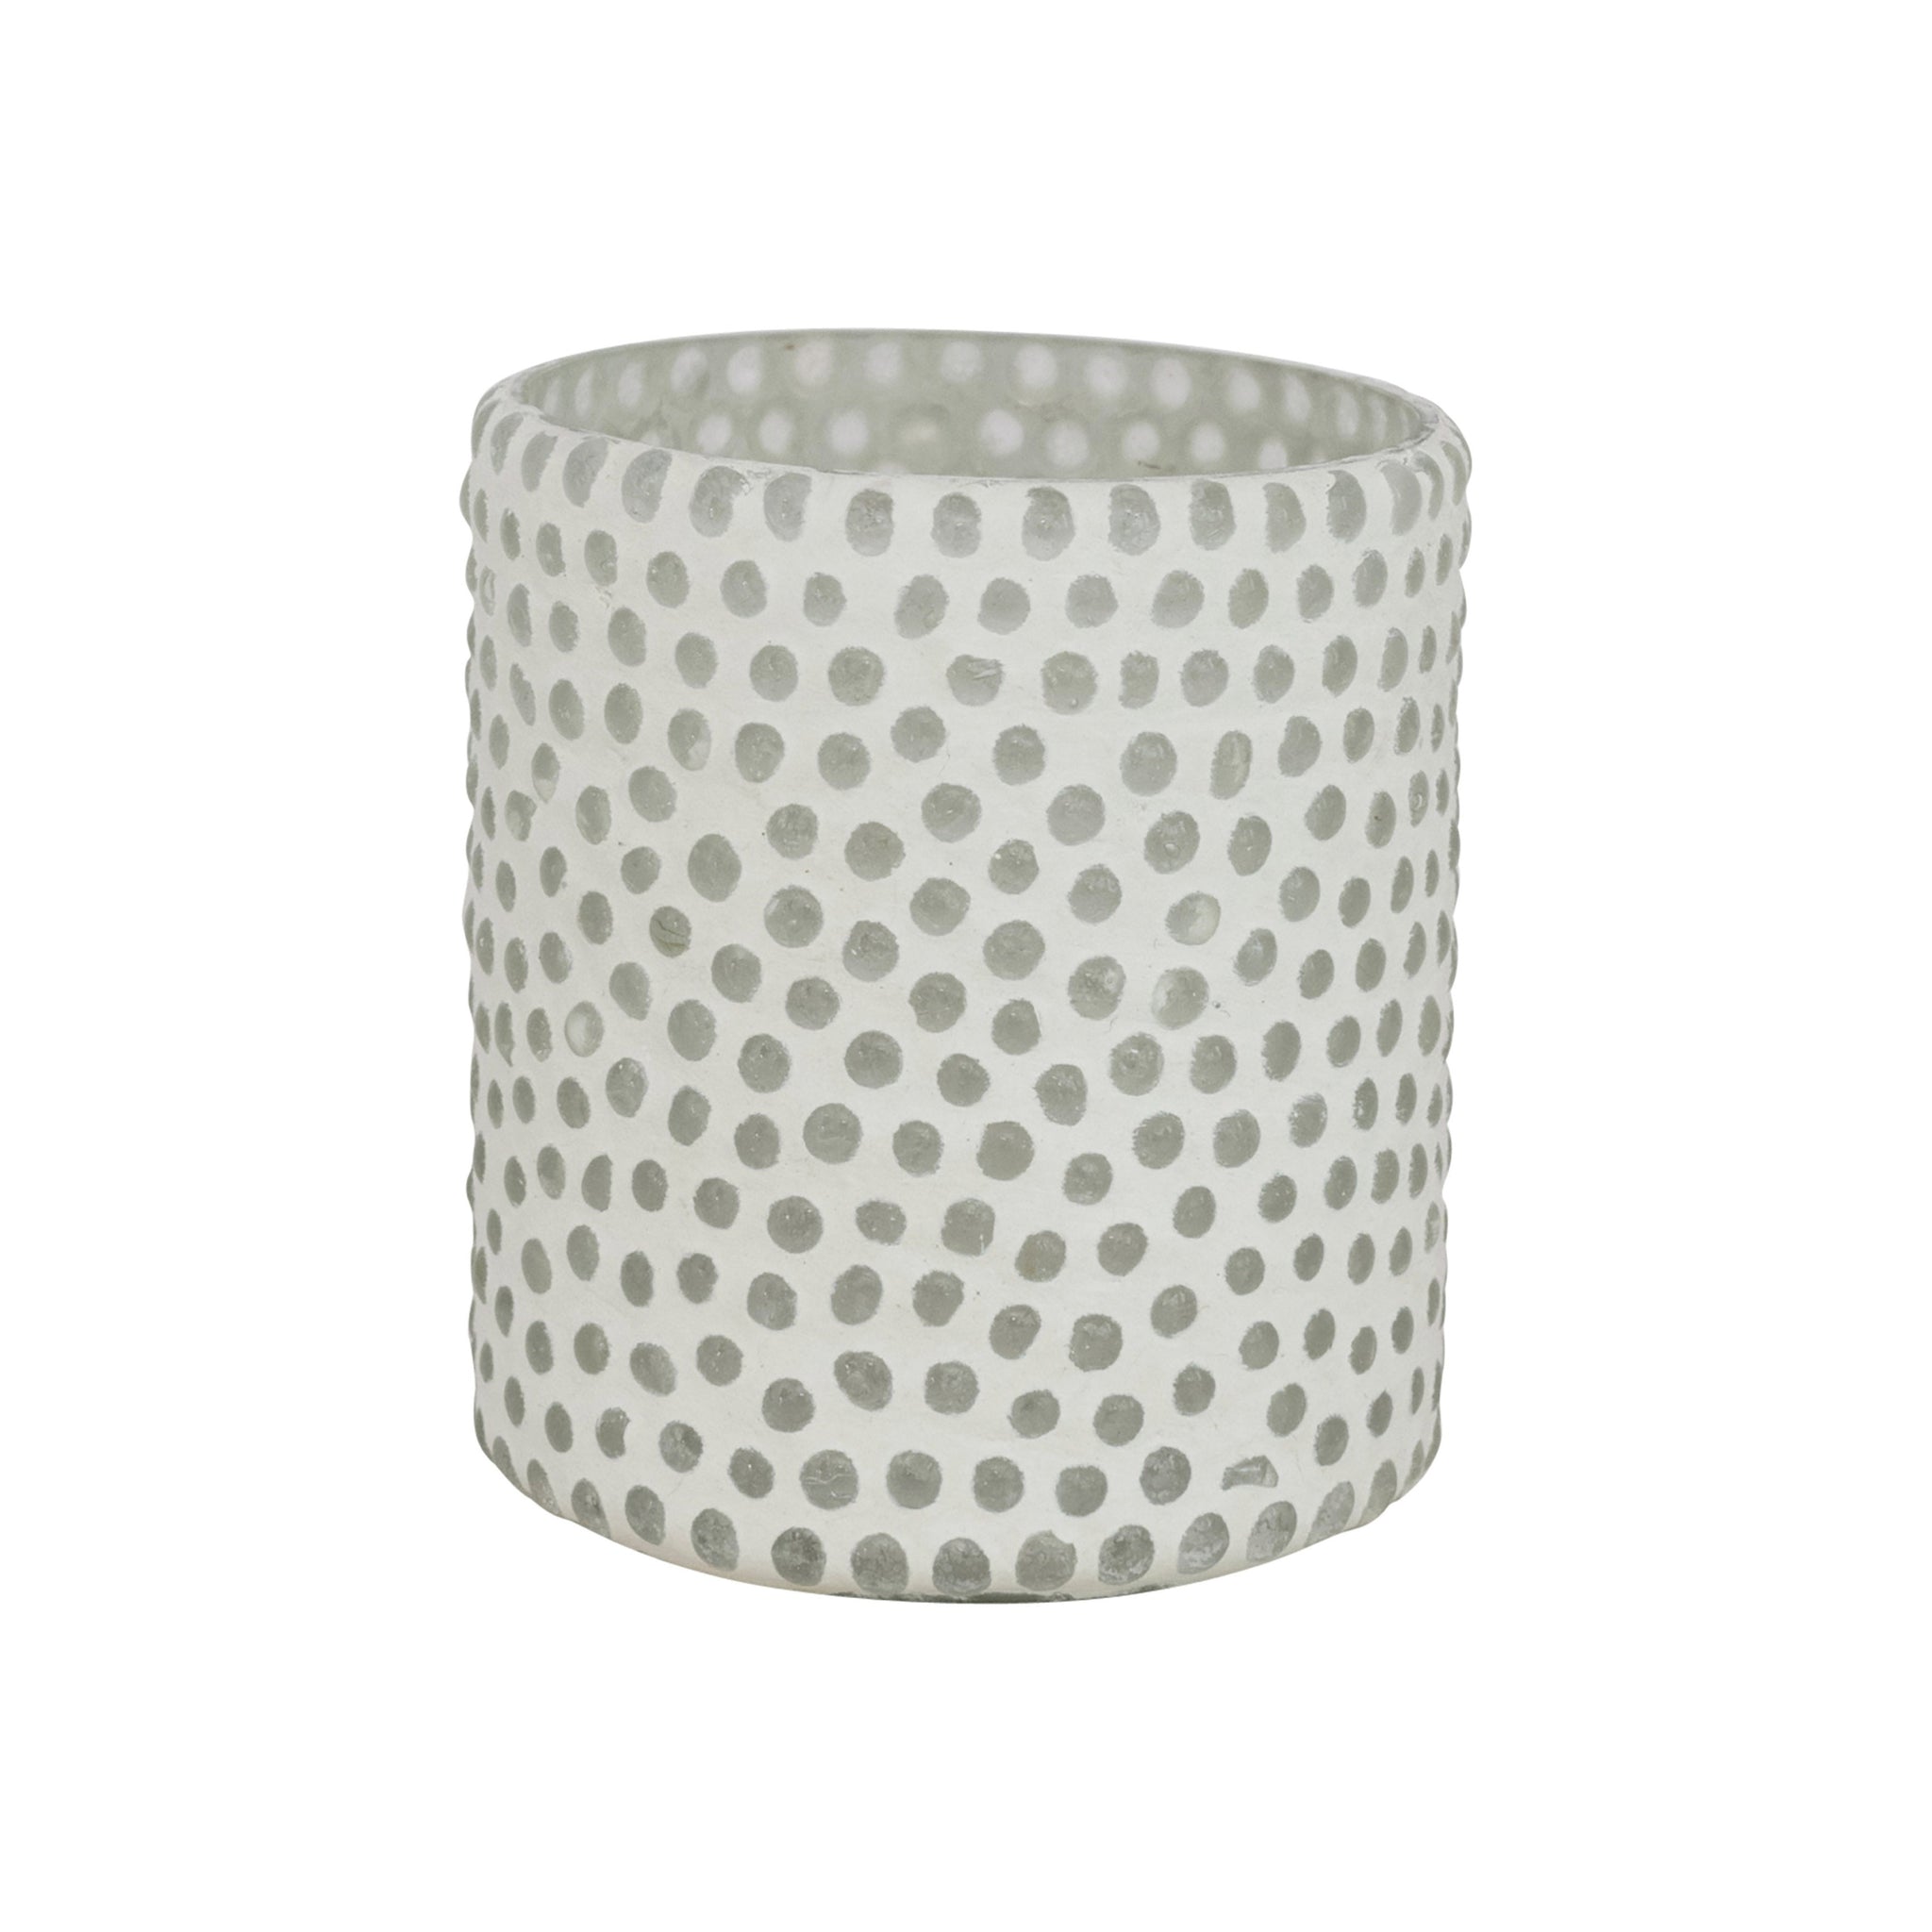 Frosted White embossed Dots Glass Tealight Candle Holder_3in.H